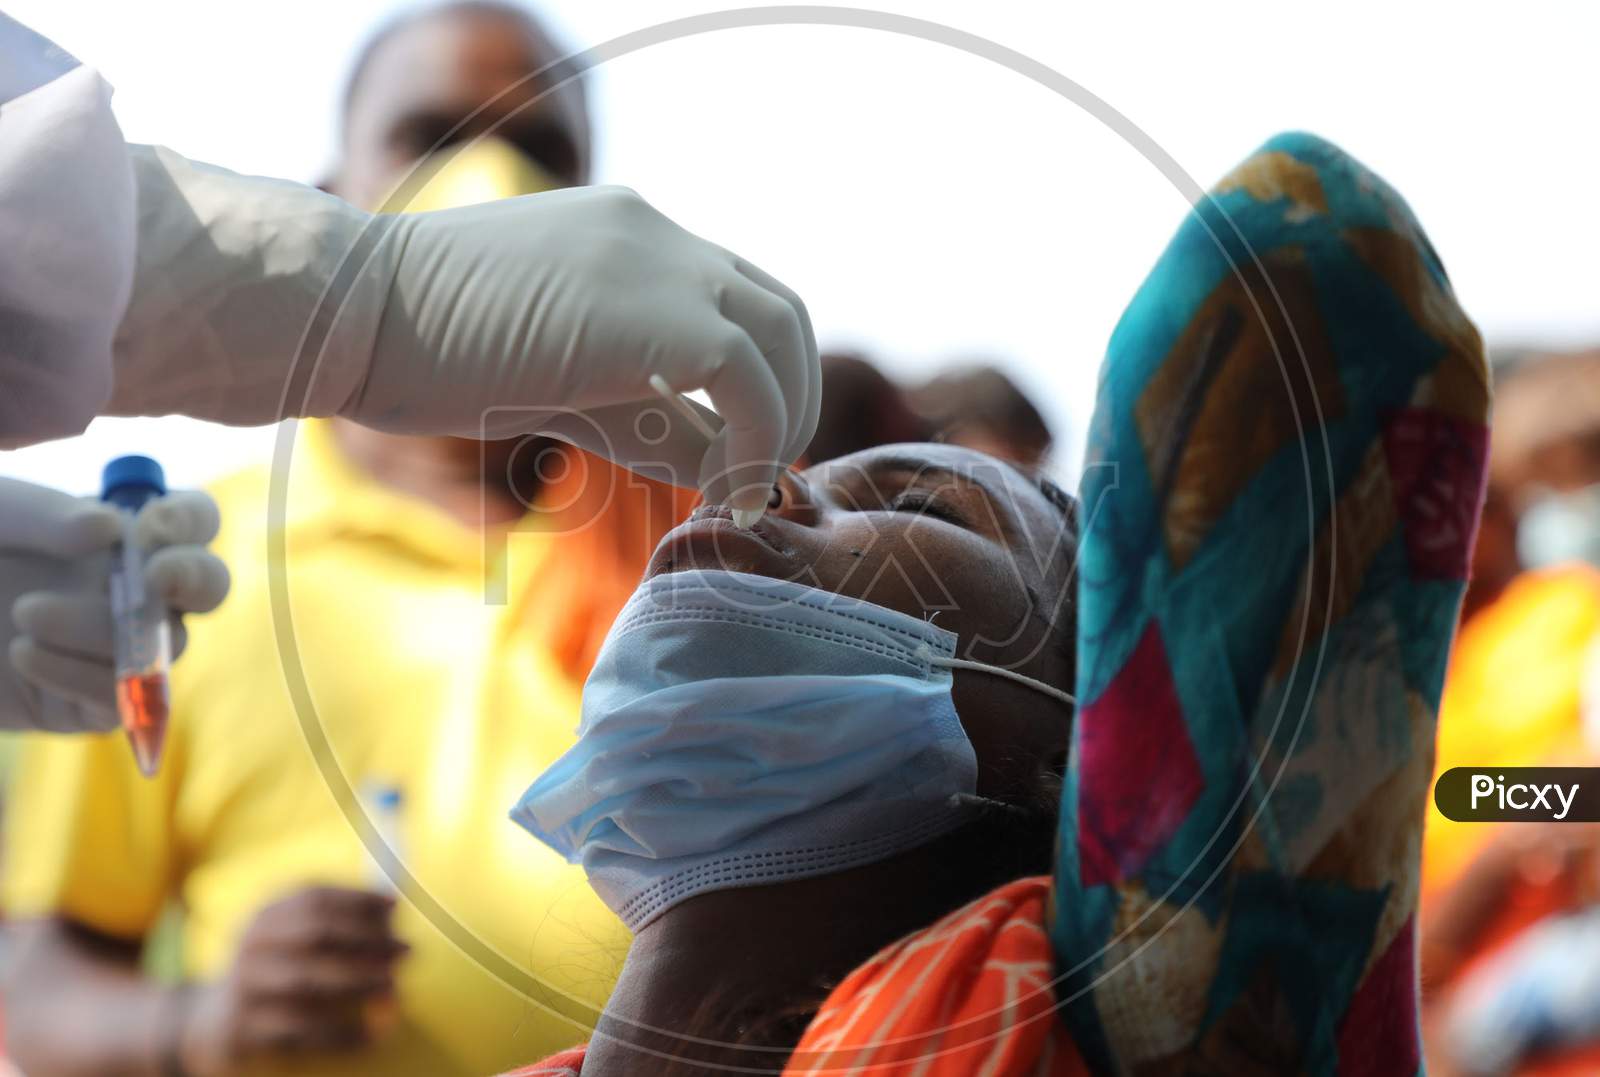 A health worker collects a swab sample from a child for Covid-19 testing in Maratha Basti, Jammu on July 16, 2020